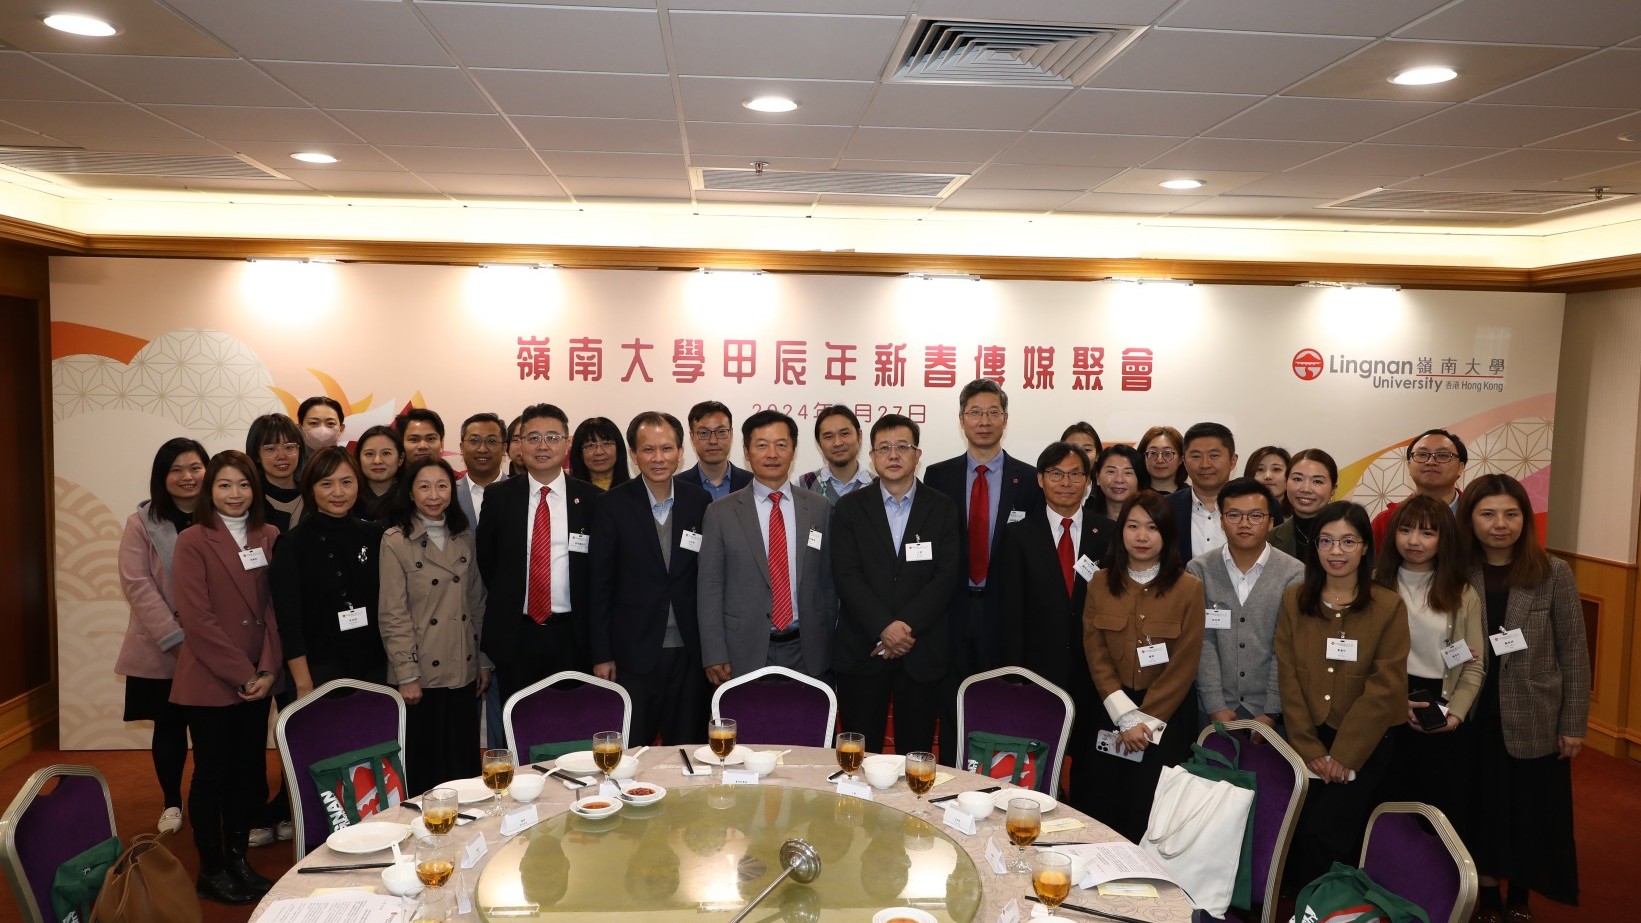 Lingnan University holds a Chinese New Year media reception on campus, where senior management members share the latest developments of the University with the media.